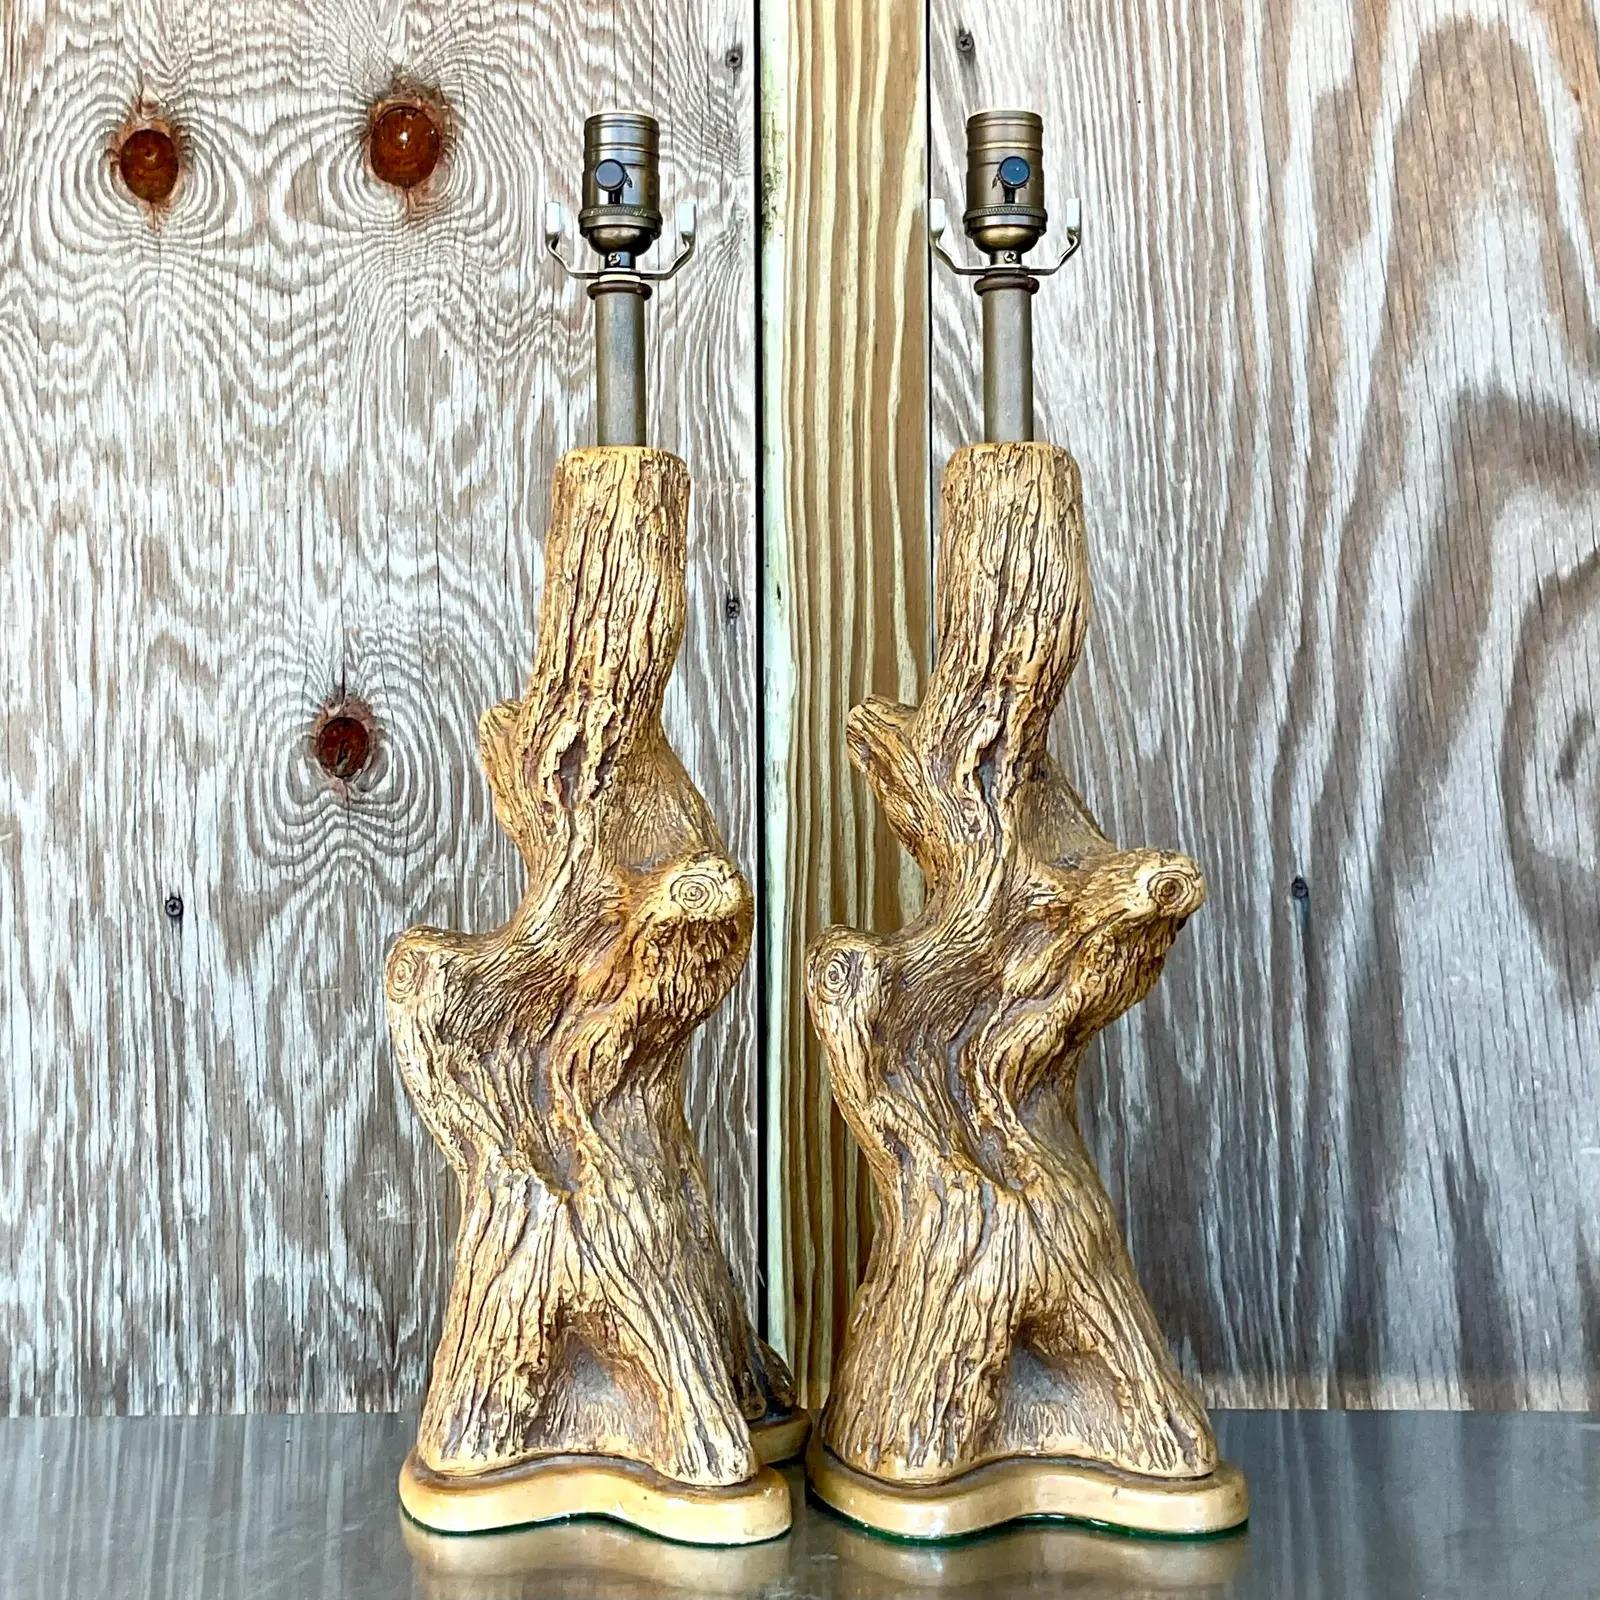 20th Century Vintage Boho Painted Plaster Tree Trunk Lamps - a Pair For Sale